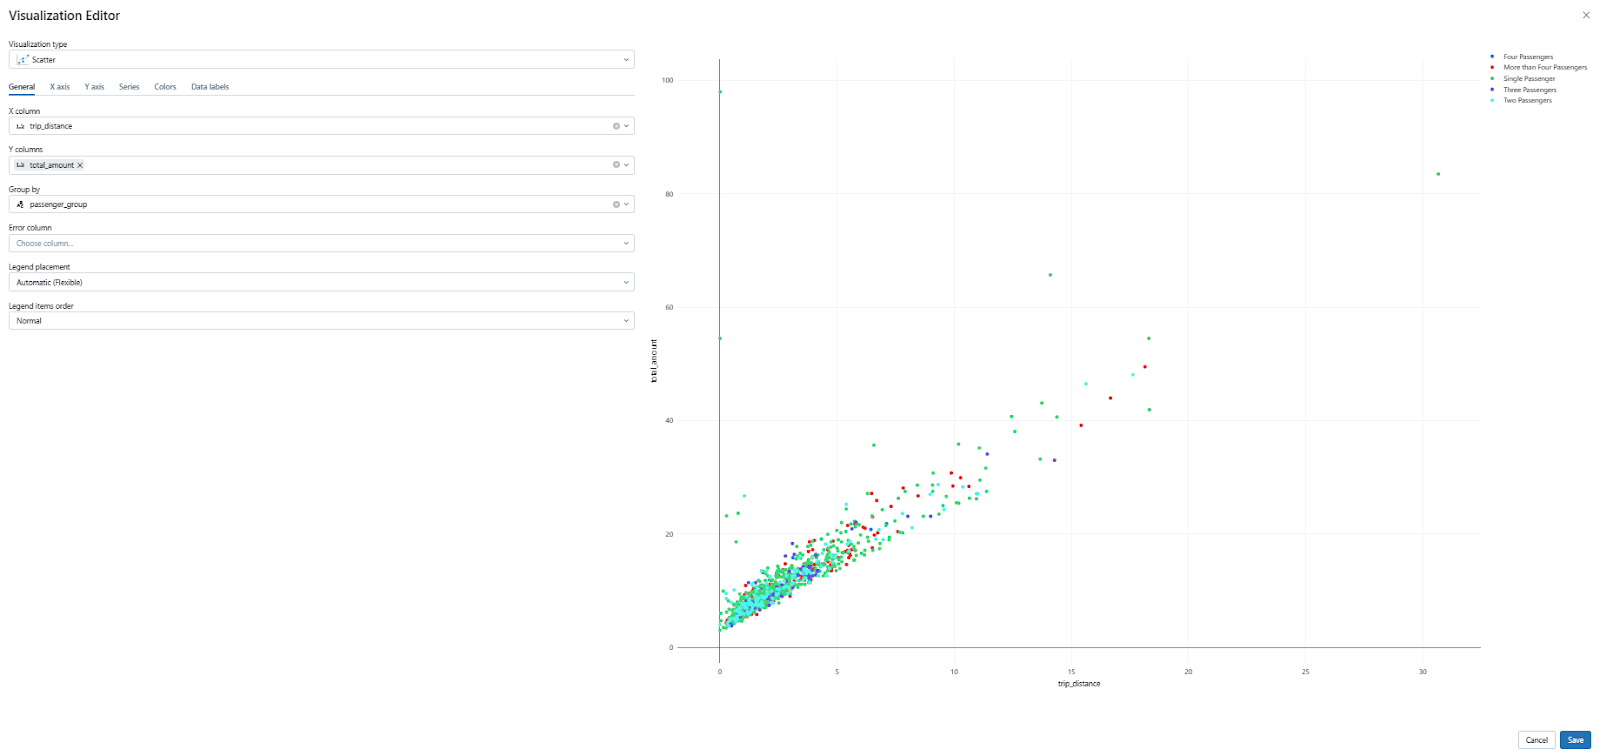 Visualizing the data in Scatter chart format - Databricks Dashboards